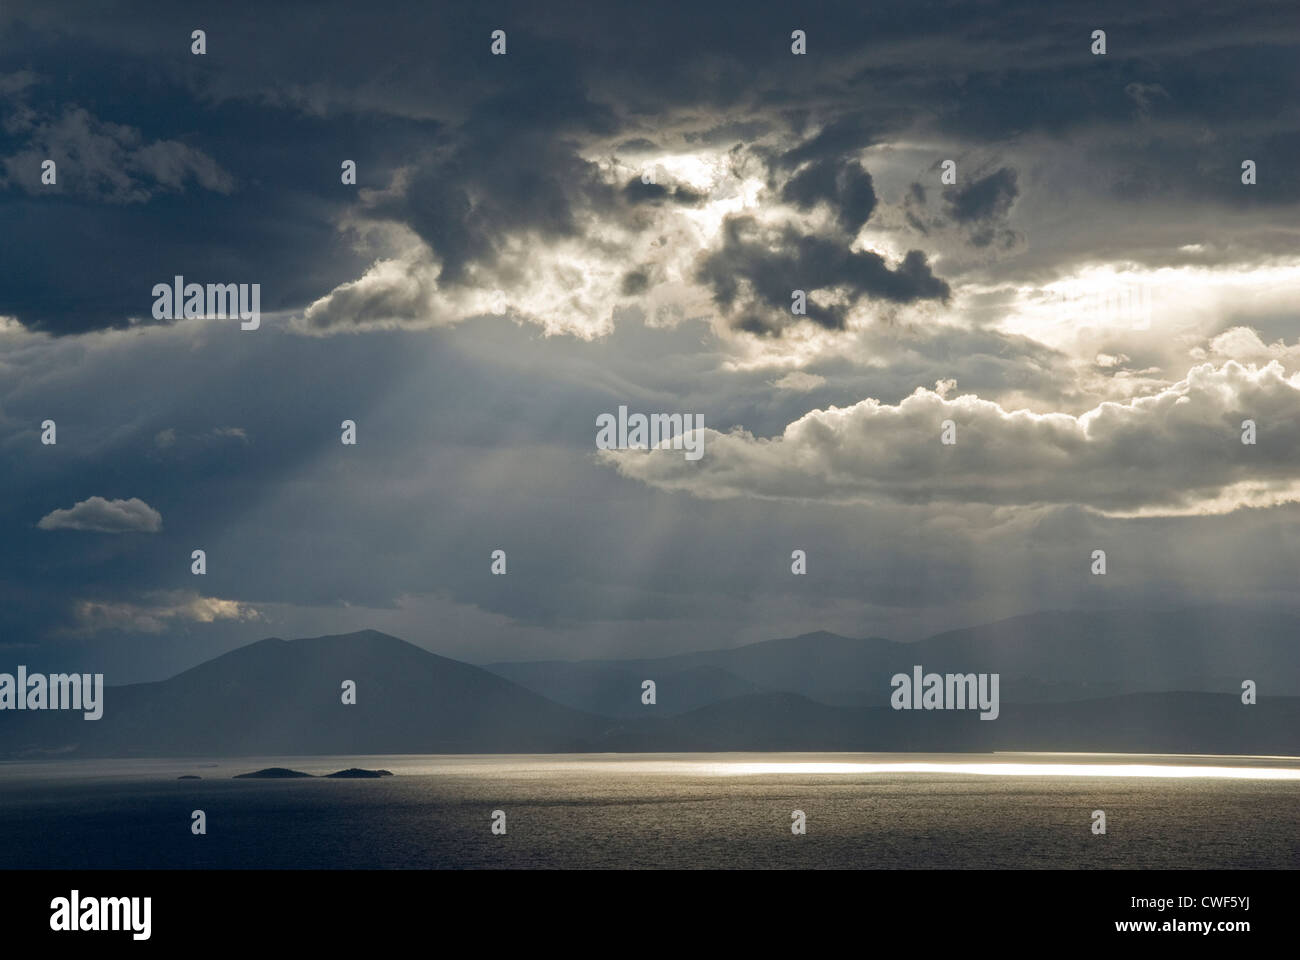 Sea View with Dramatic Clouds Stock Photo